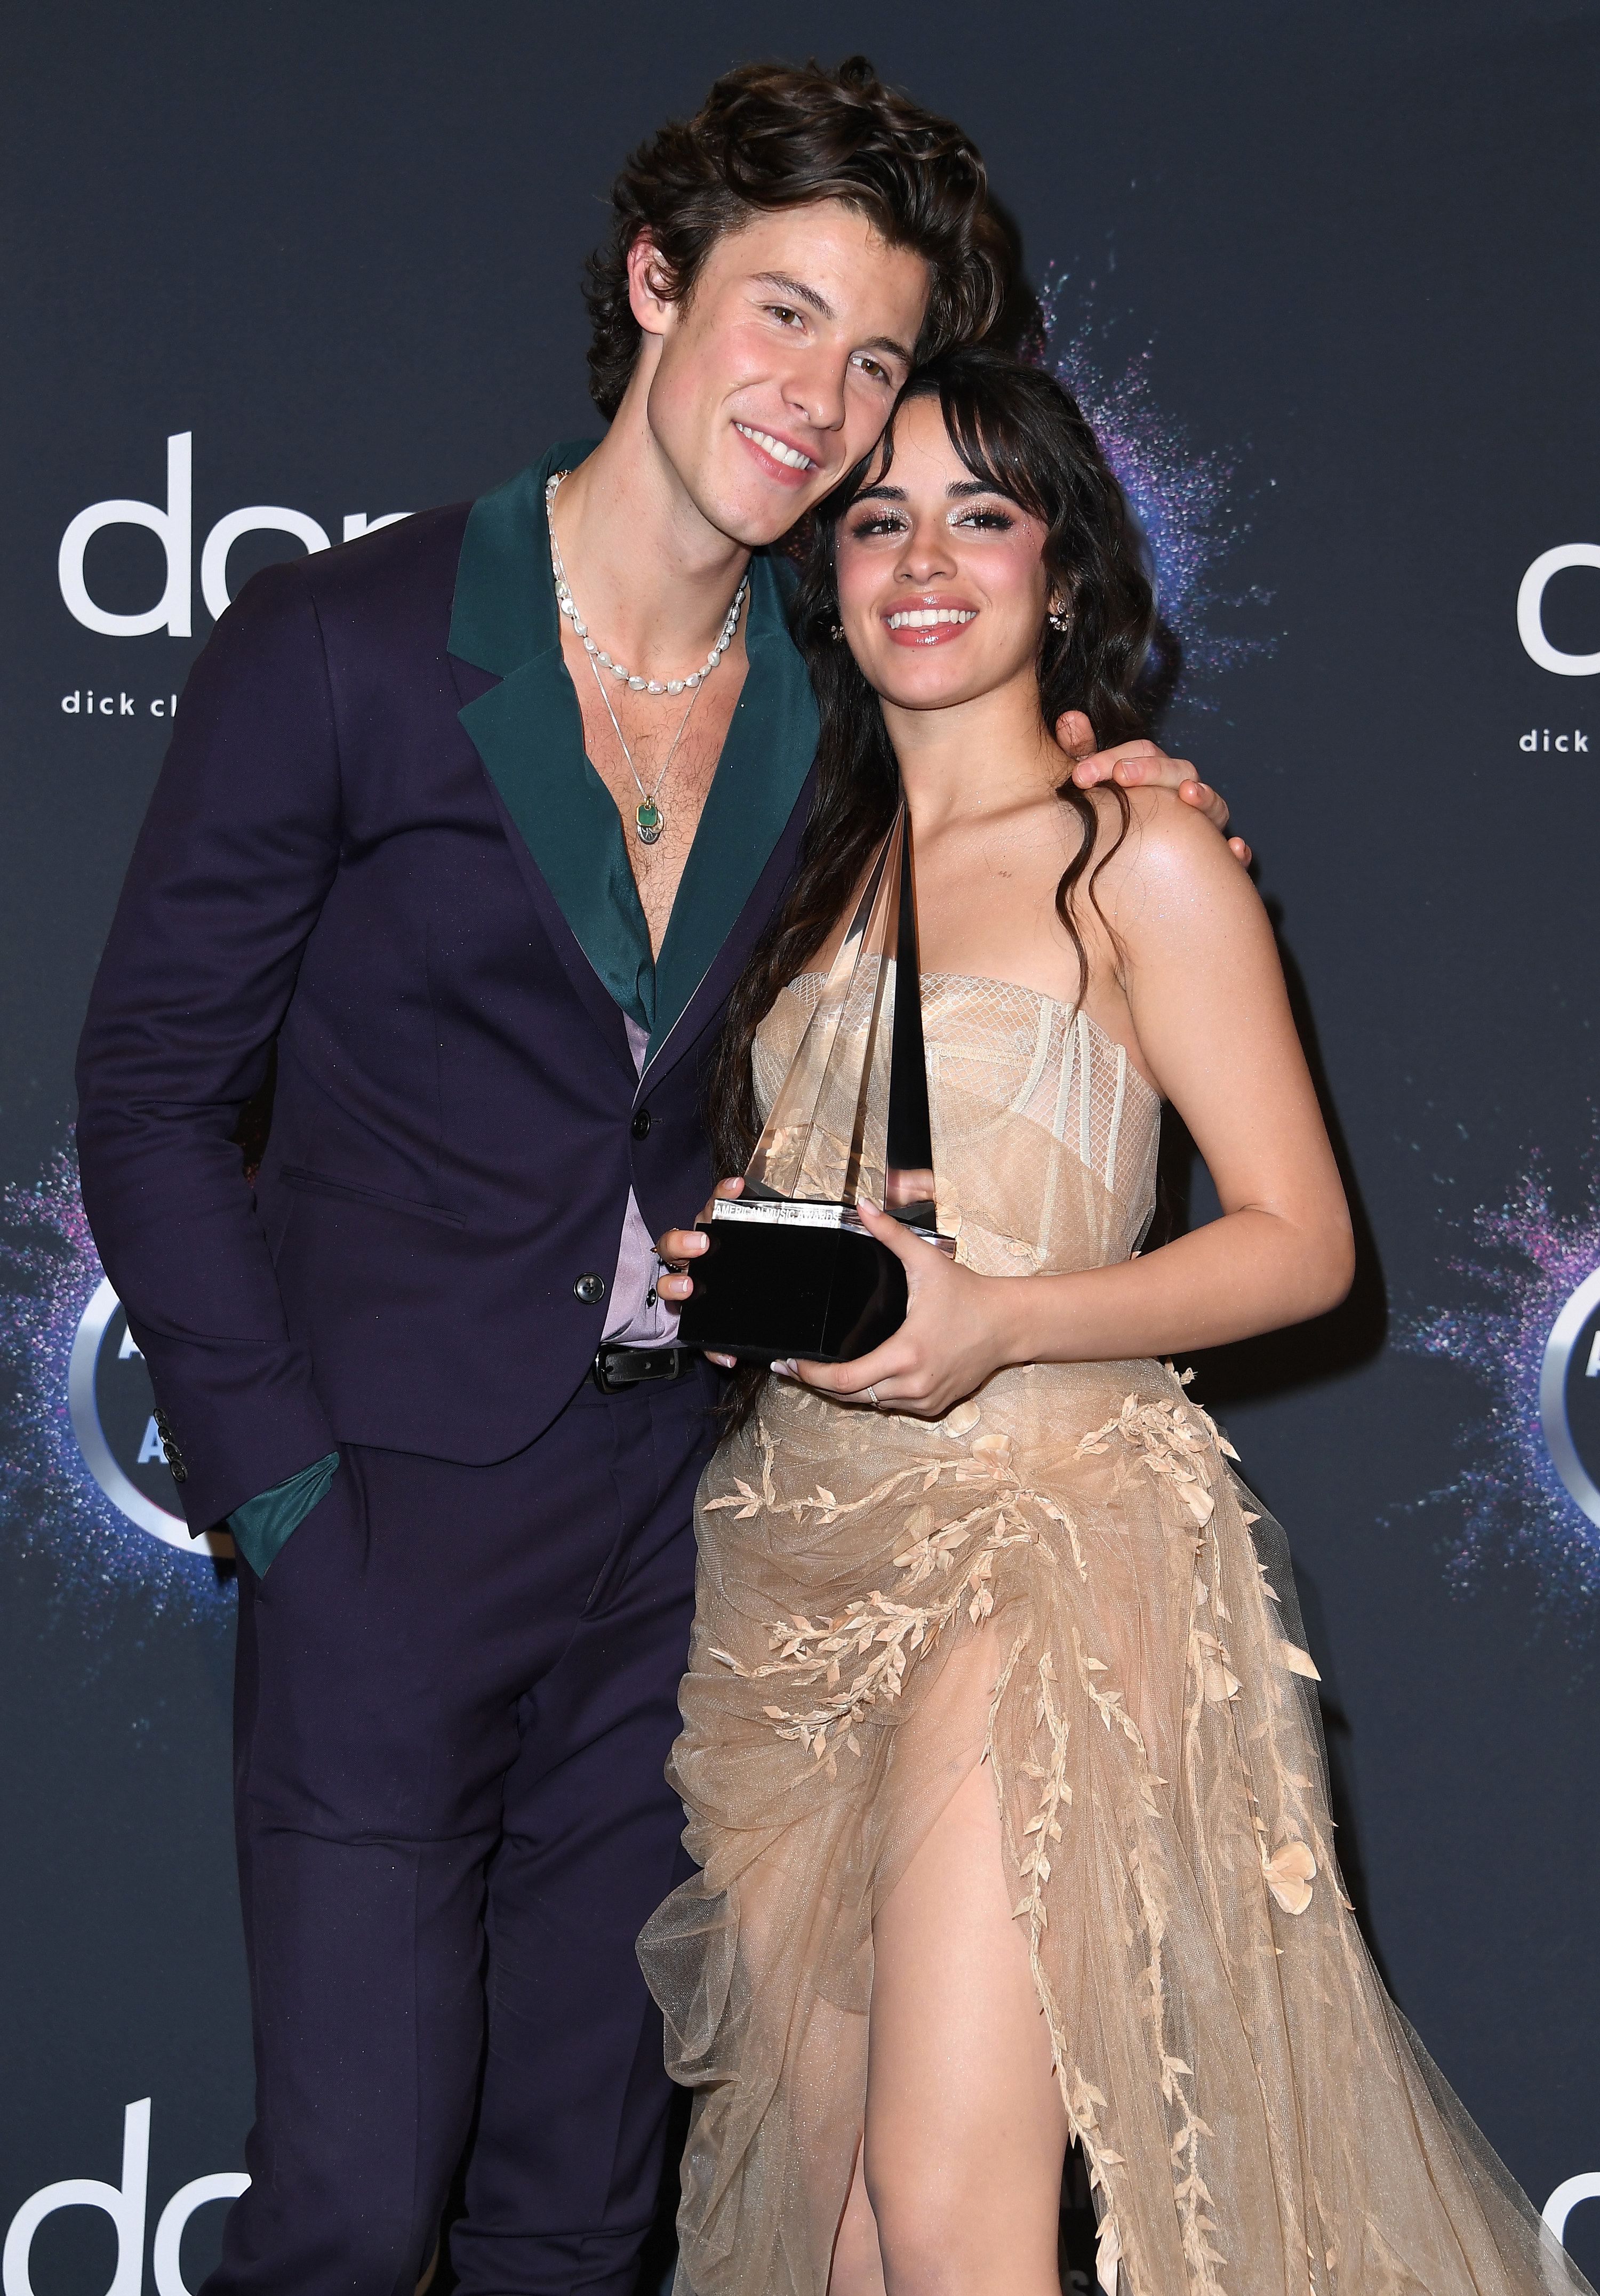 The former couple smiling as Camilla holds an American Music Awards on the red carpet